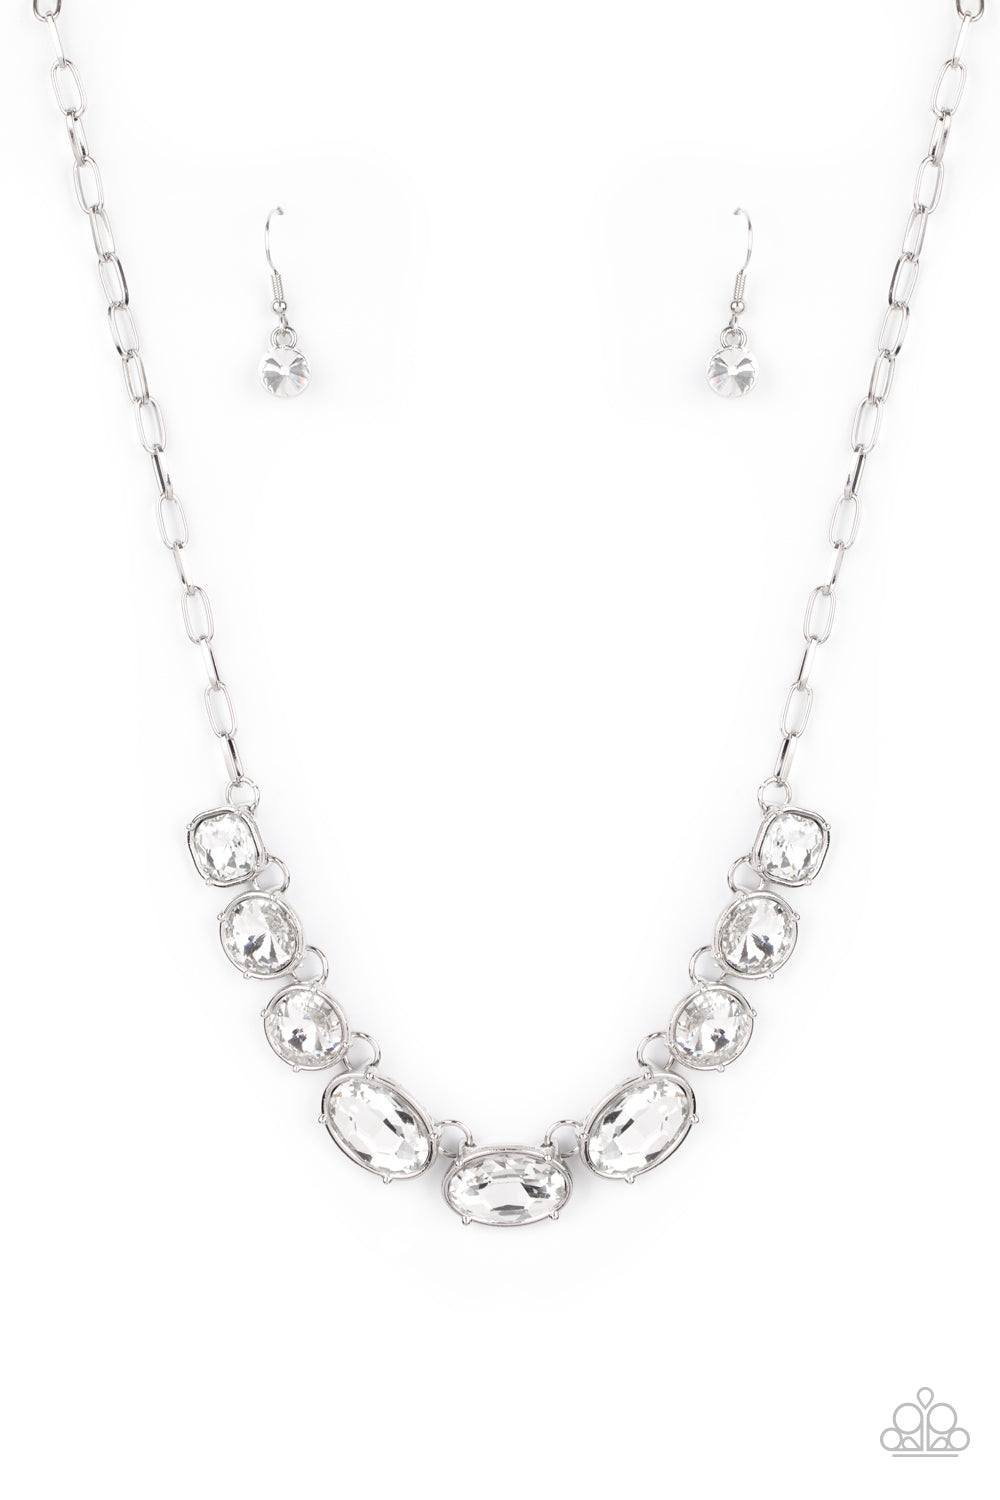 Paparazzi Gorgeously Glacial - White Necklace - June 2021 Life Of The Party Exclusive - A Finishing Touch Jewelry